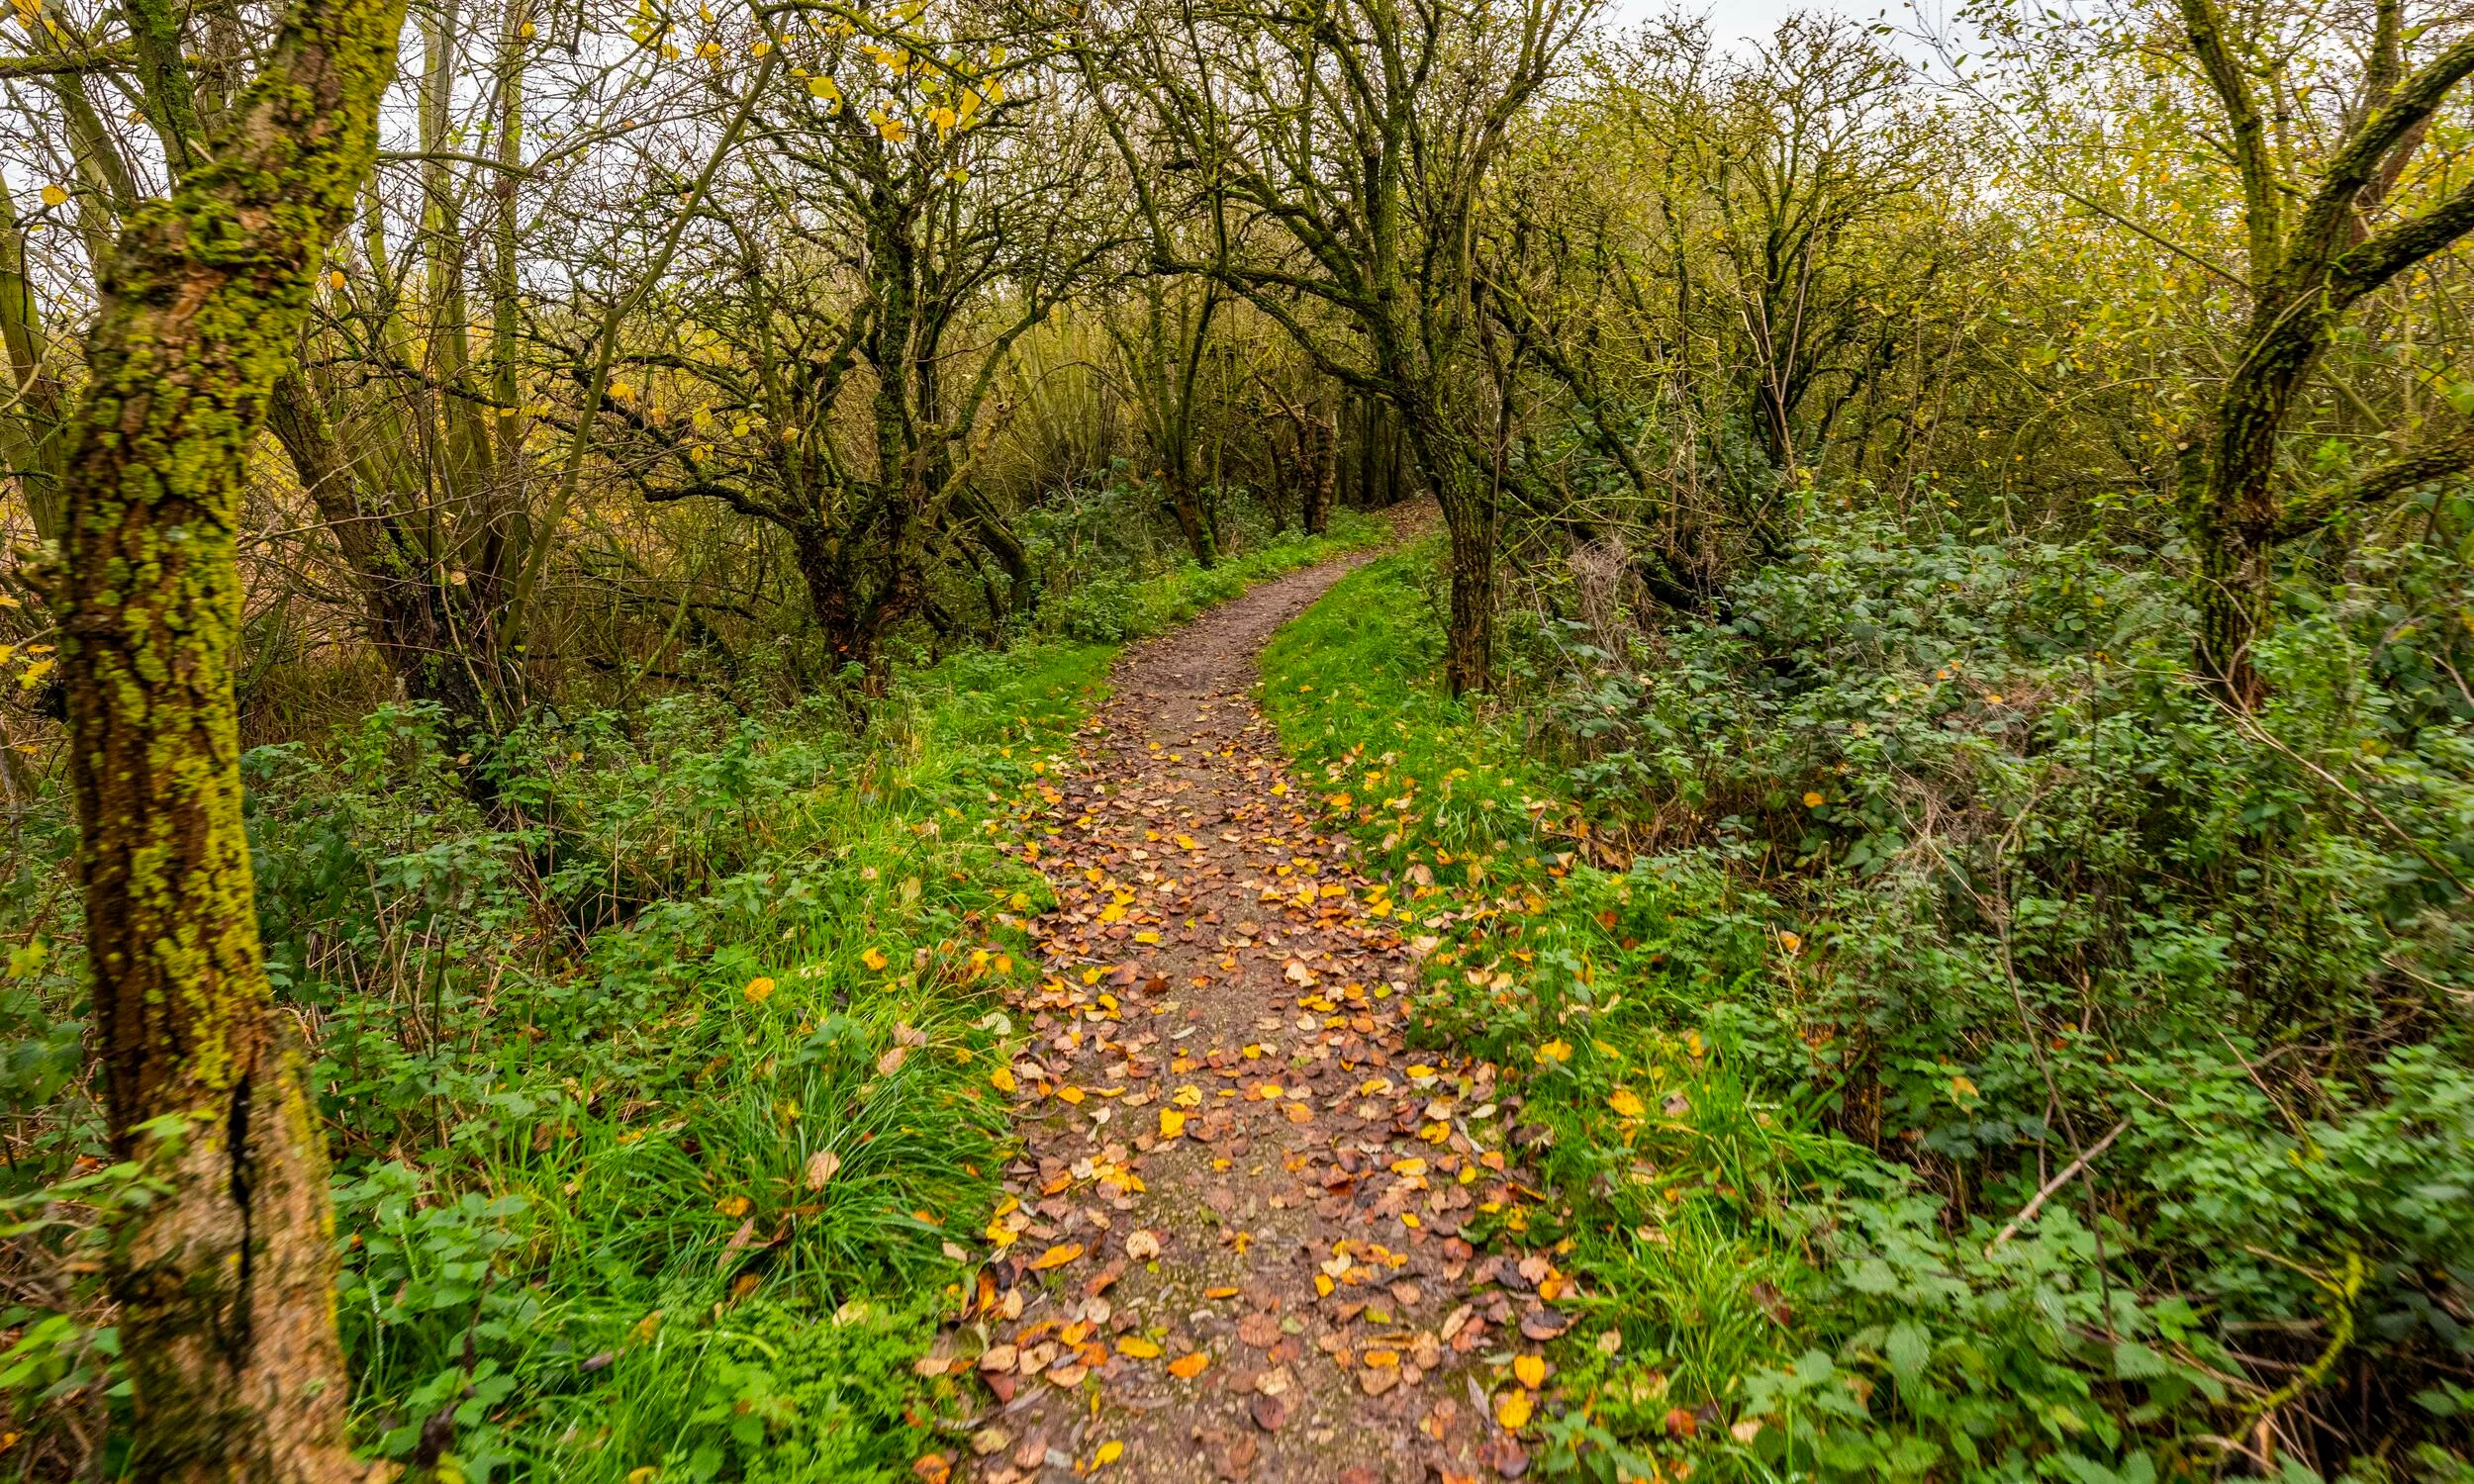 A winding woodland trail, with fallen leaves on the ground, at Blacktoft sands nature reserve